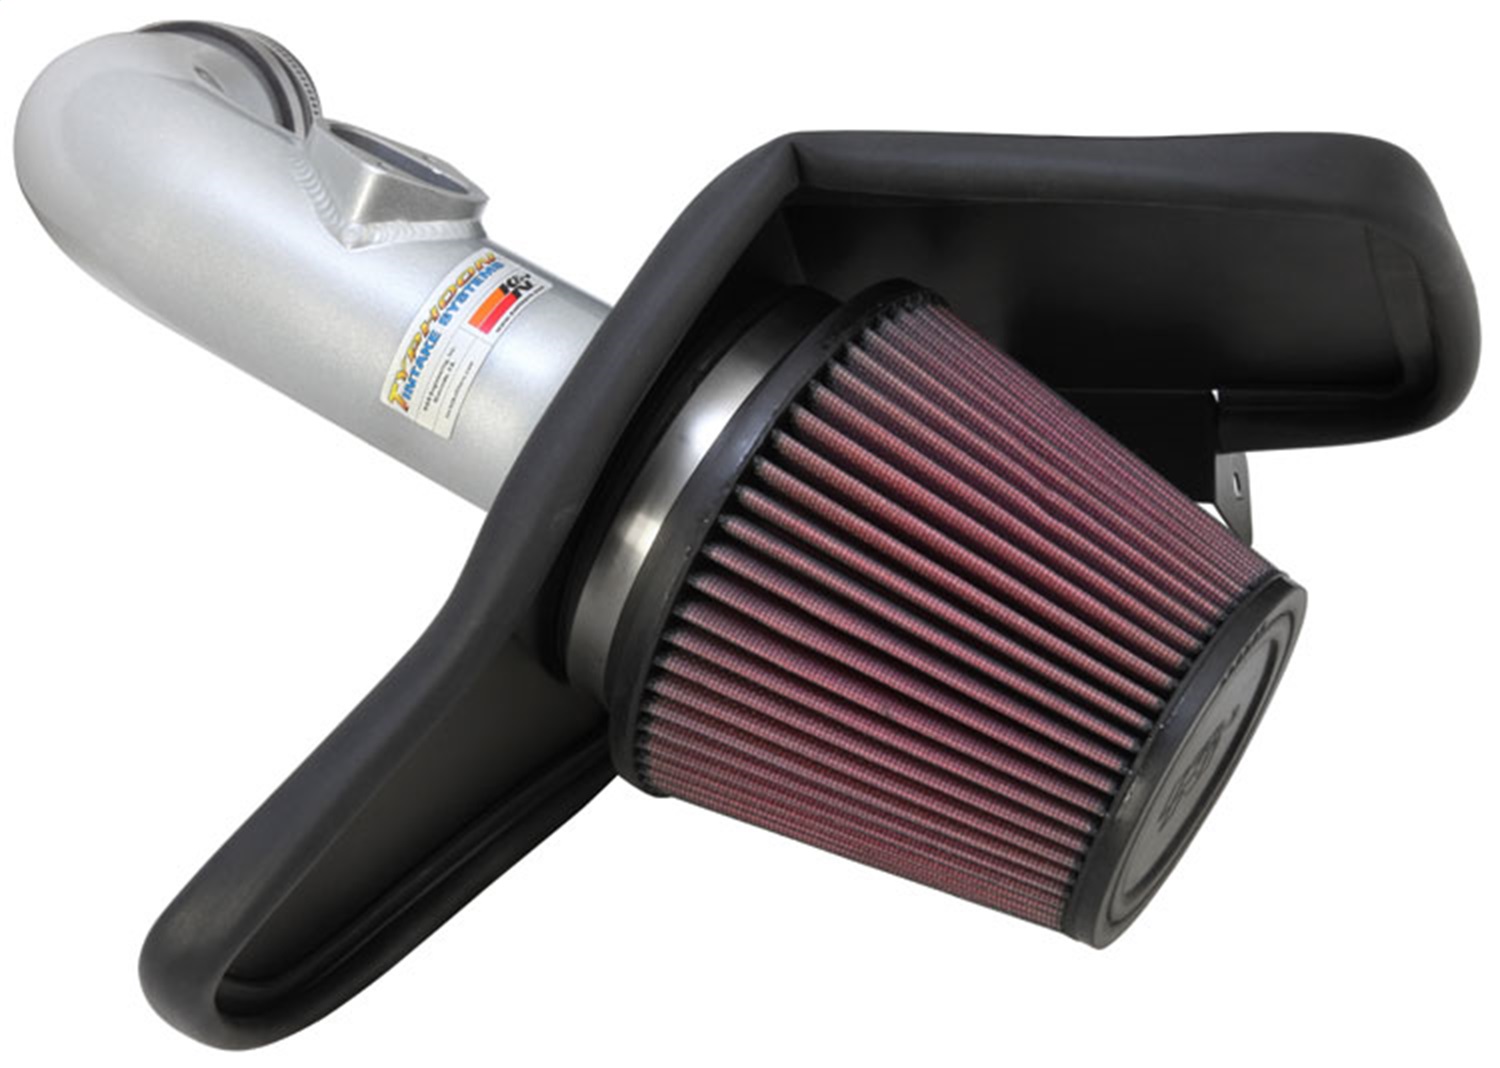 K&N Filters K&N Filters 69-4522TS Typhoon; Cold Air Intake Filter Assembly Fits 11-12 Cruze